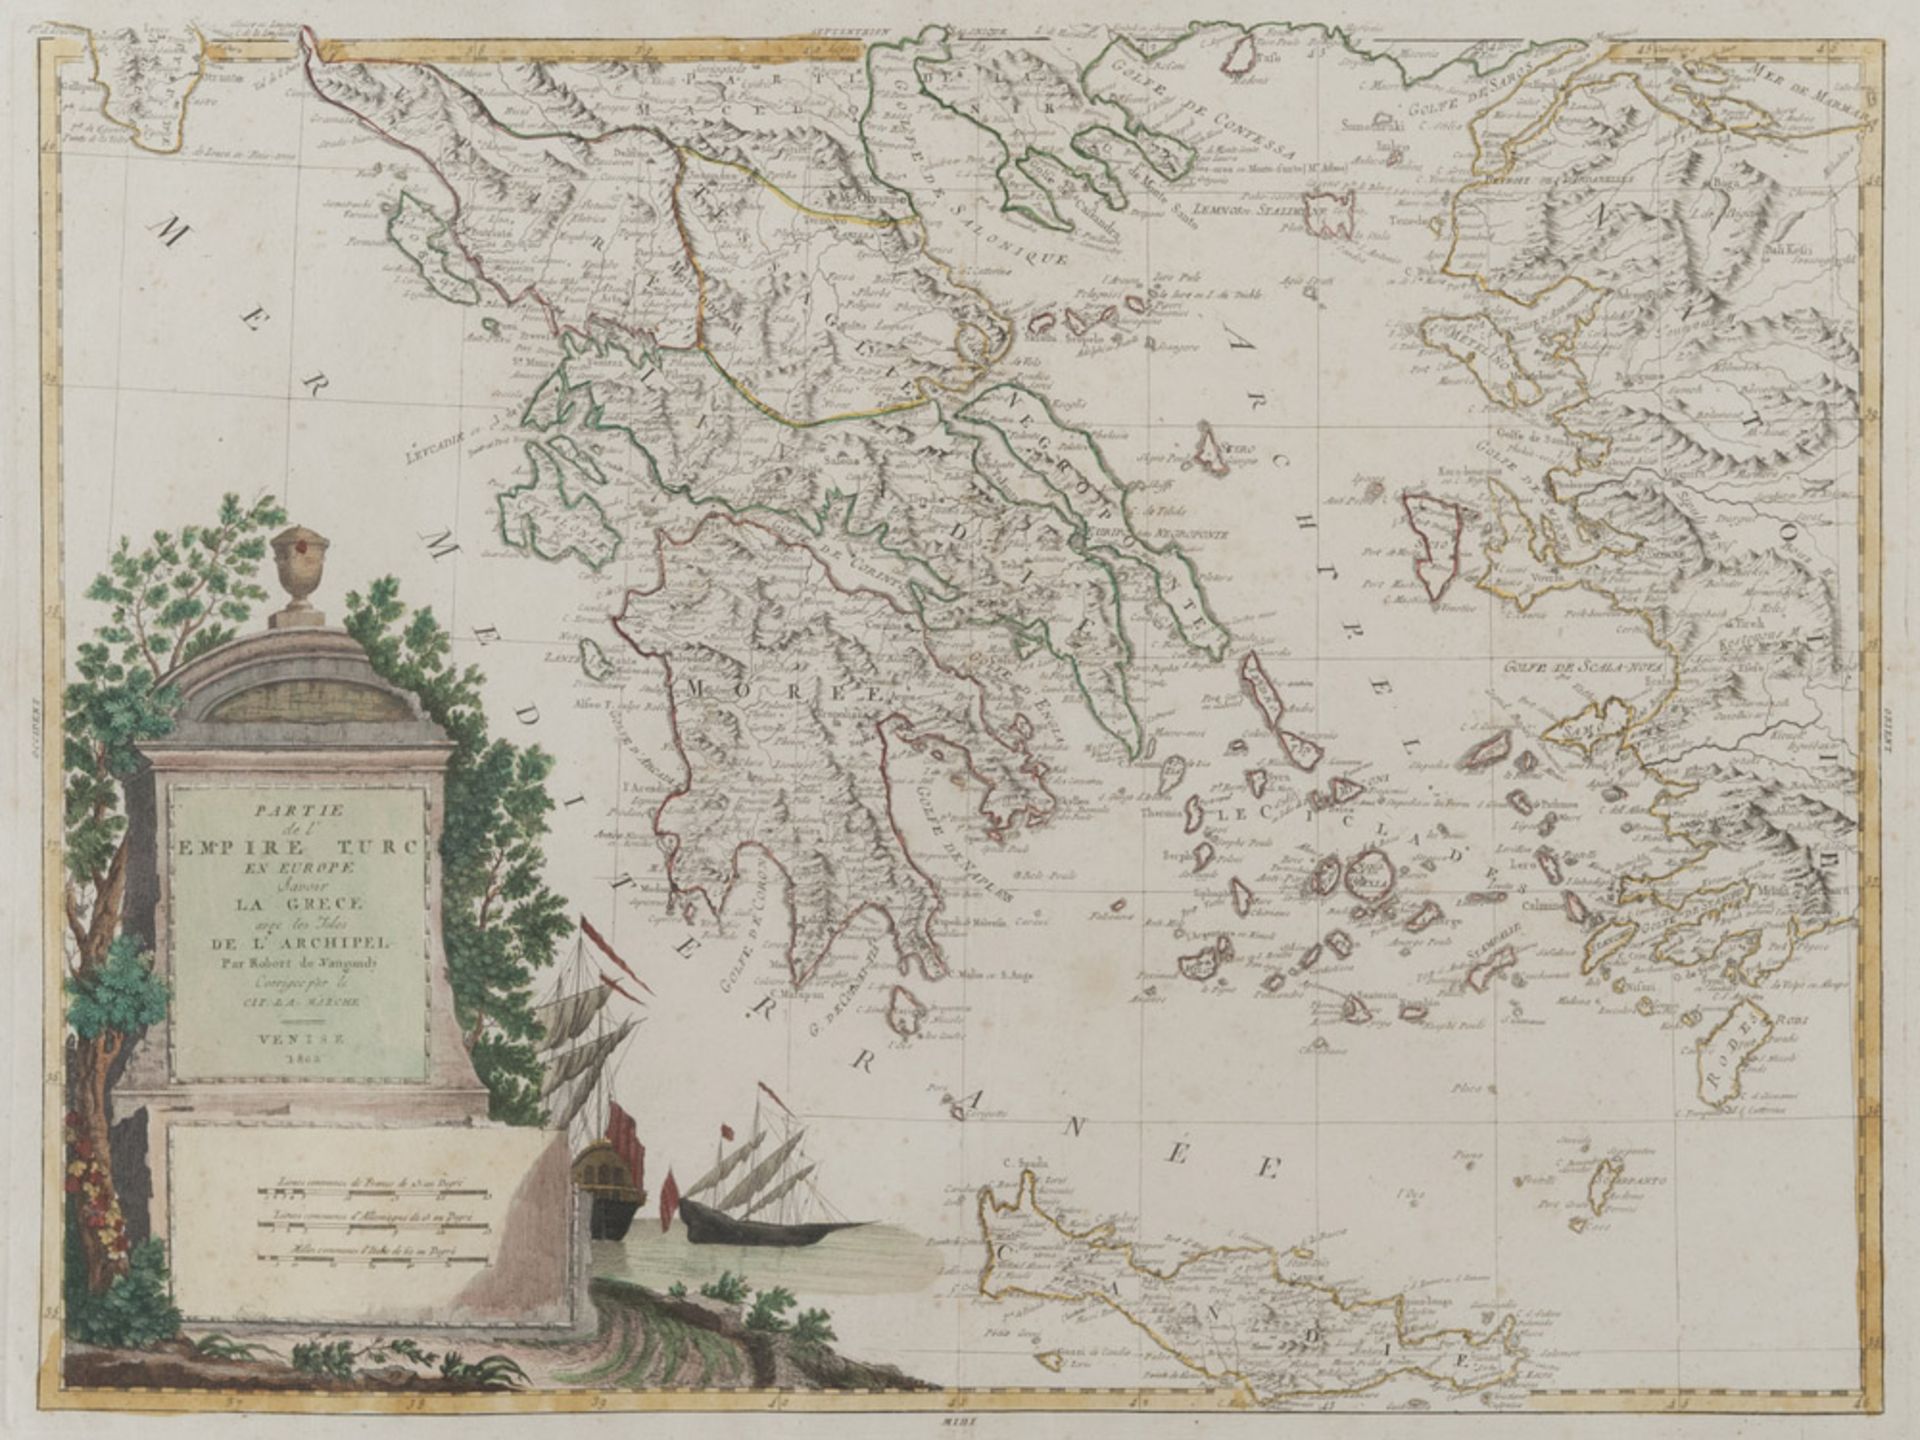 French engraver, early 19th century. Turkish and Greece. Color geographical print, cm. 48 x 61.